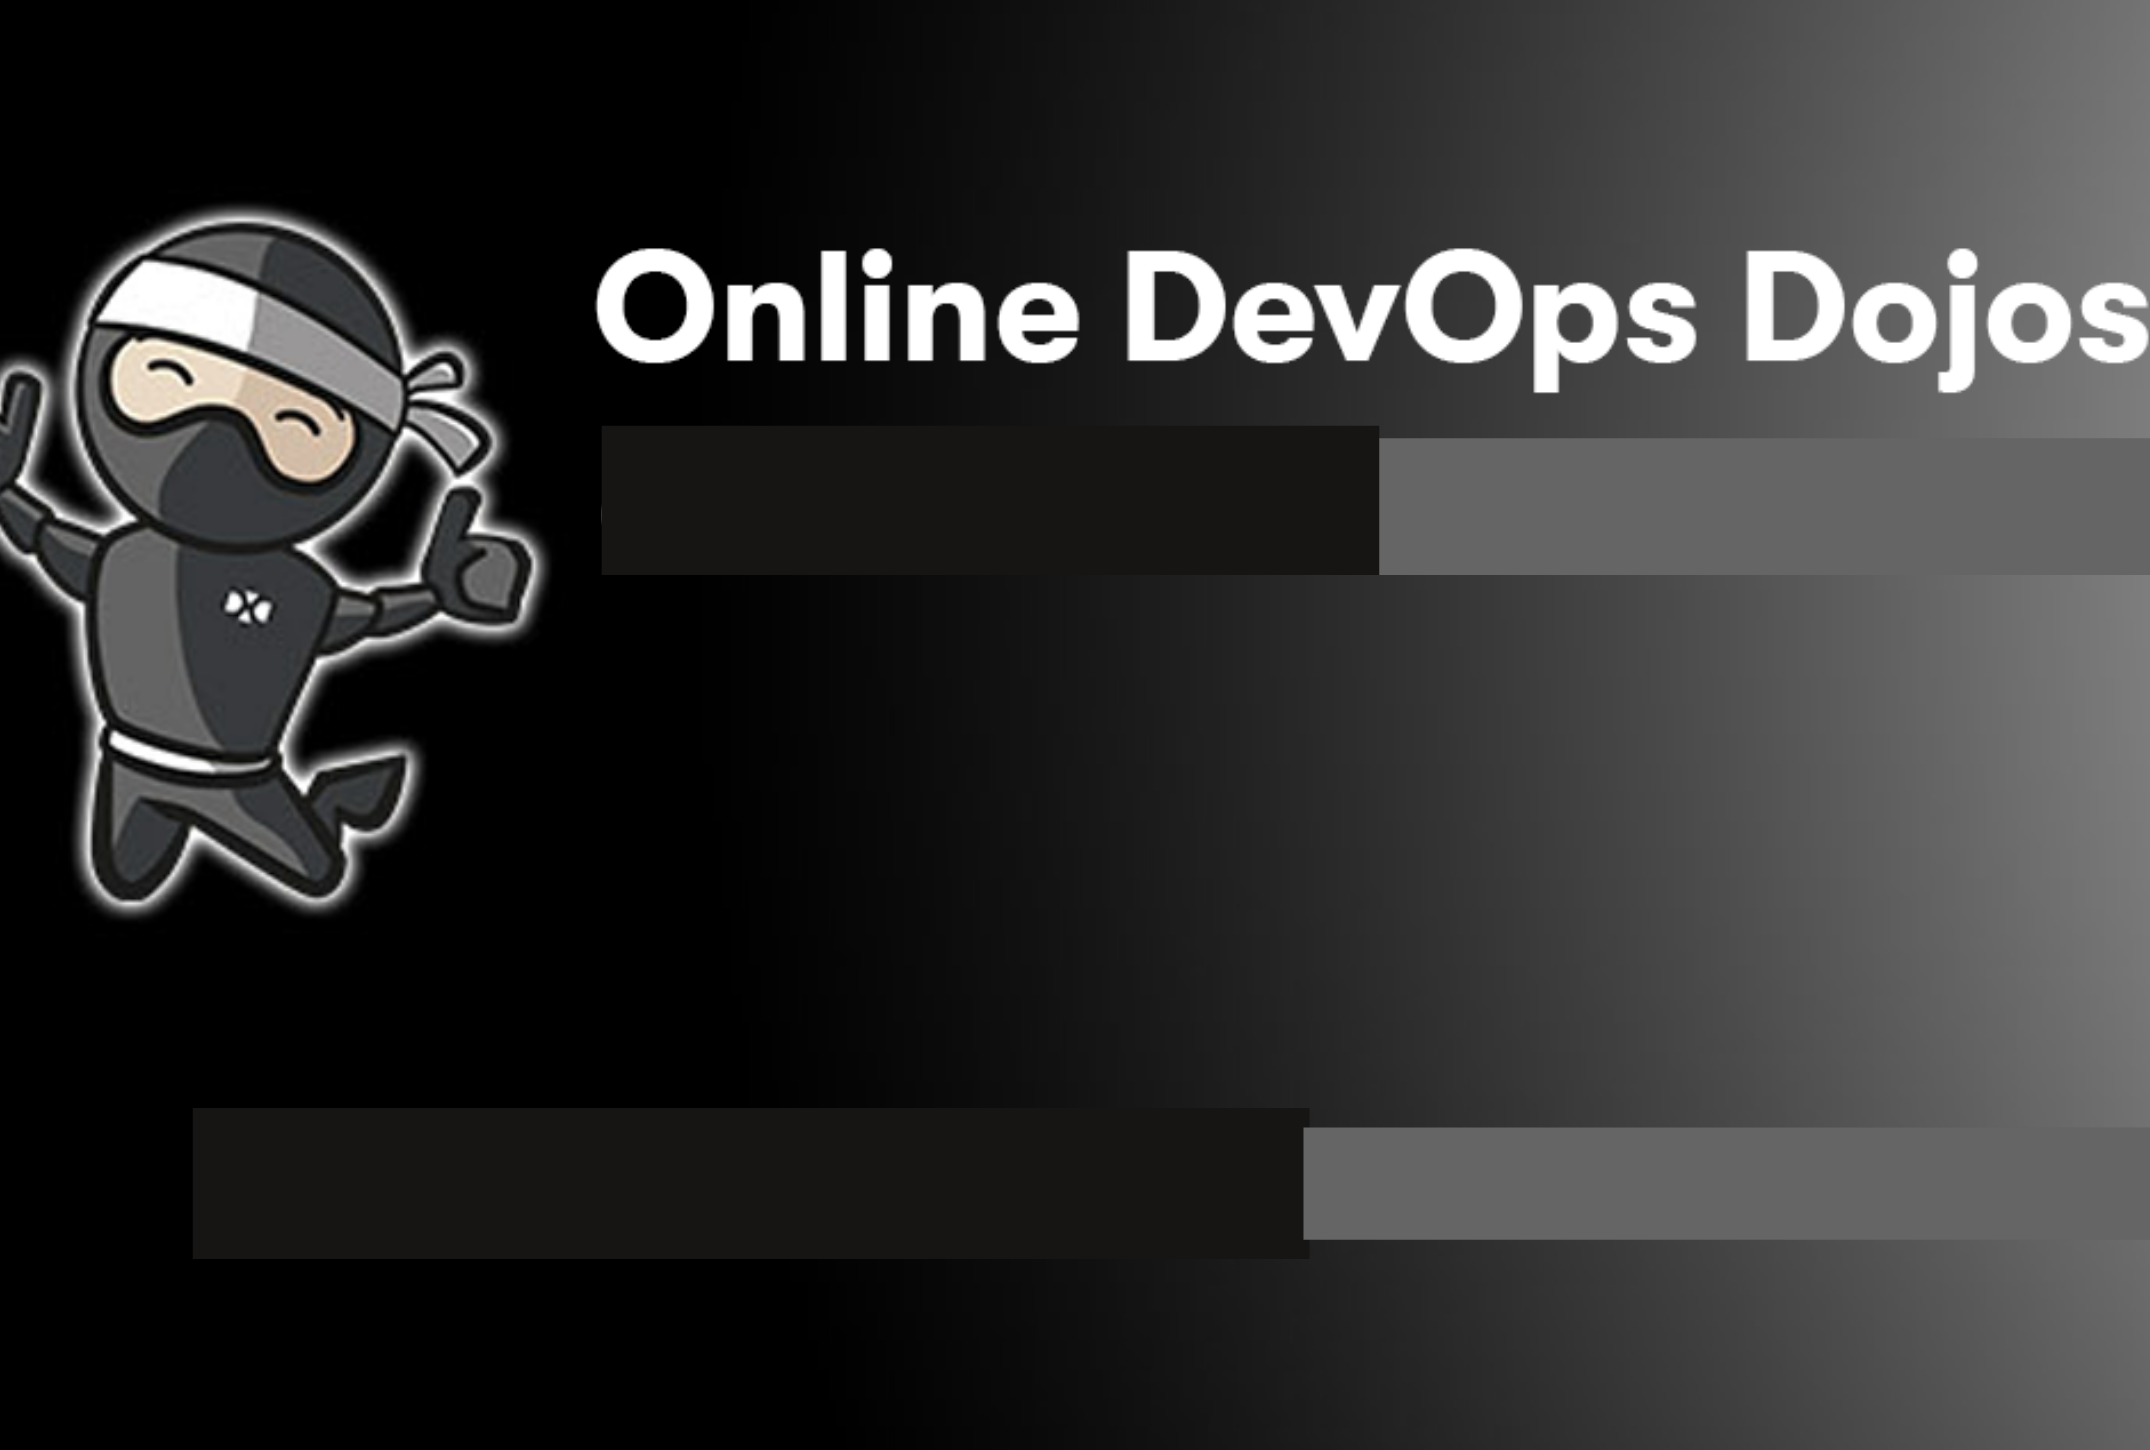 Hey! Have a look to the all new Online DevOps Dojo